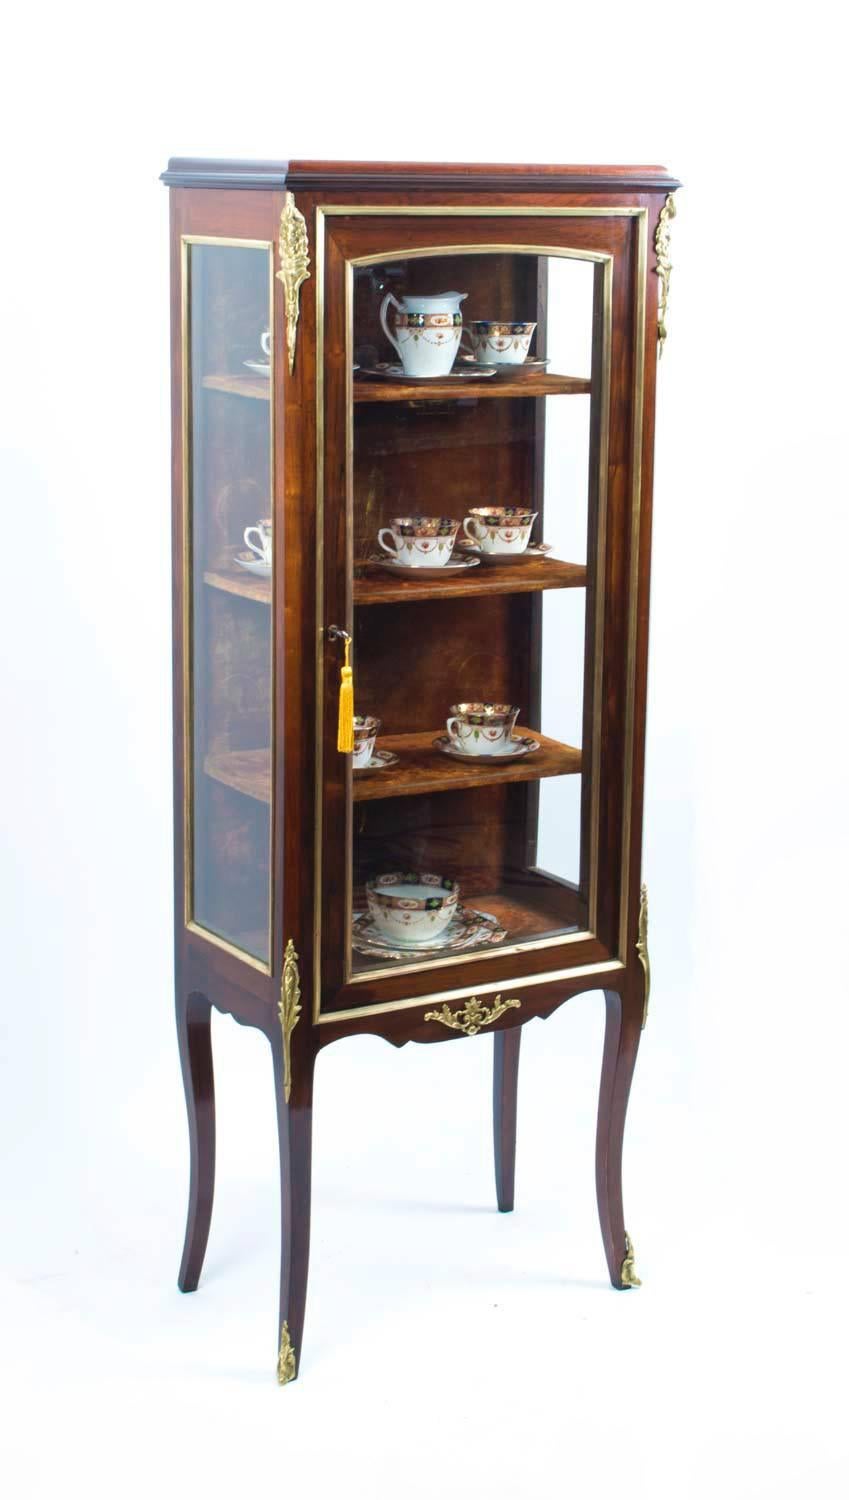 This is a beautiful antique French mahogany and ormolu mounted display cabinet in the French Louis XV manner, circa 1900 in date. 

This beautiful cabinet has an abundance of exquisite ormolu mounts. 

It has glass to the front and sides, the